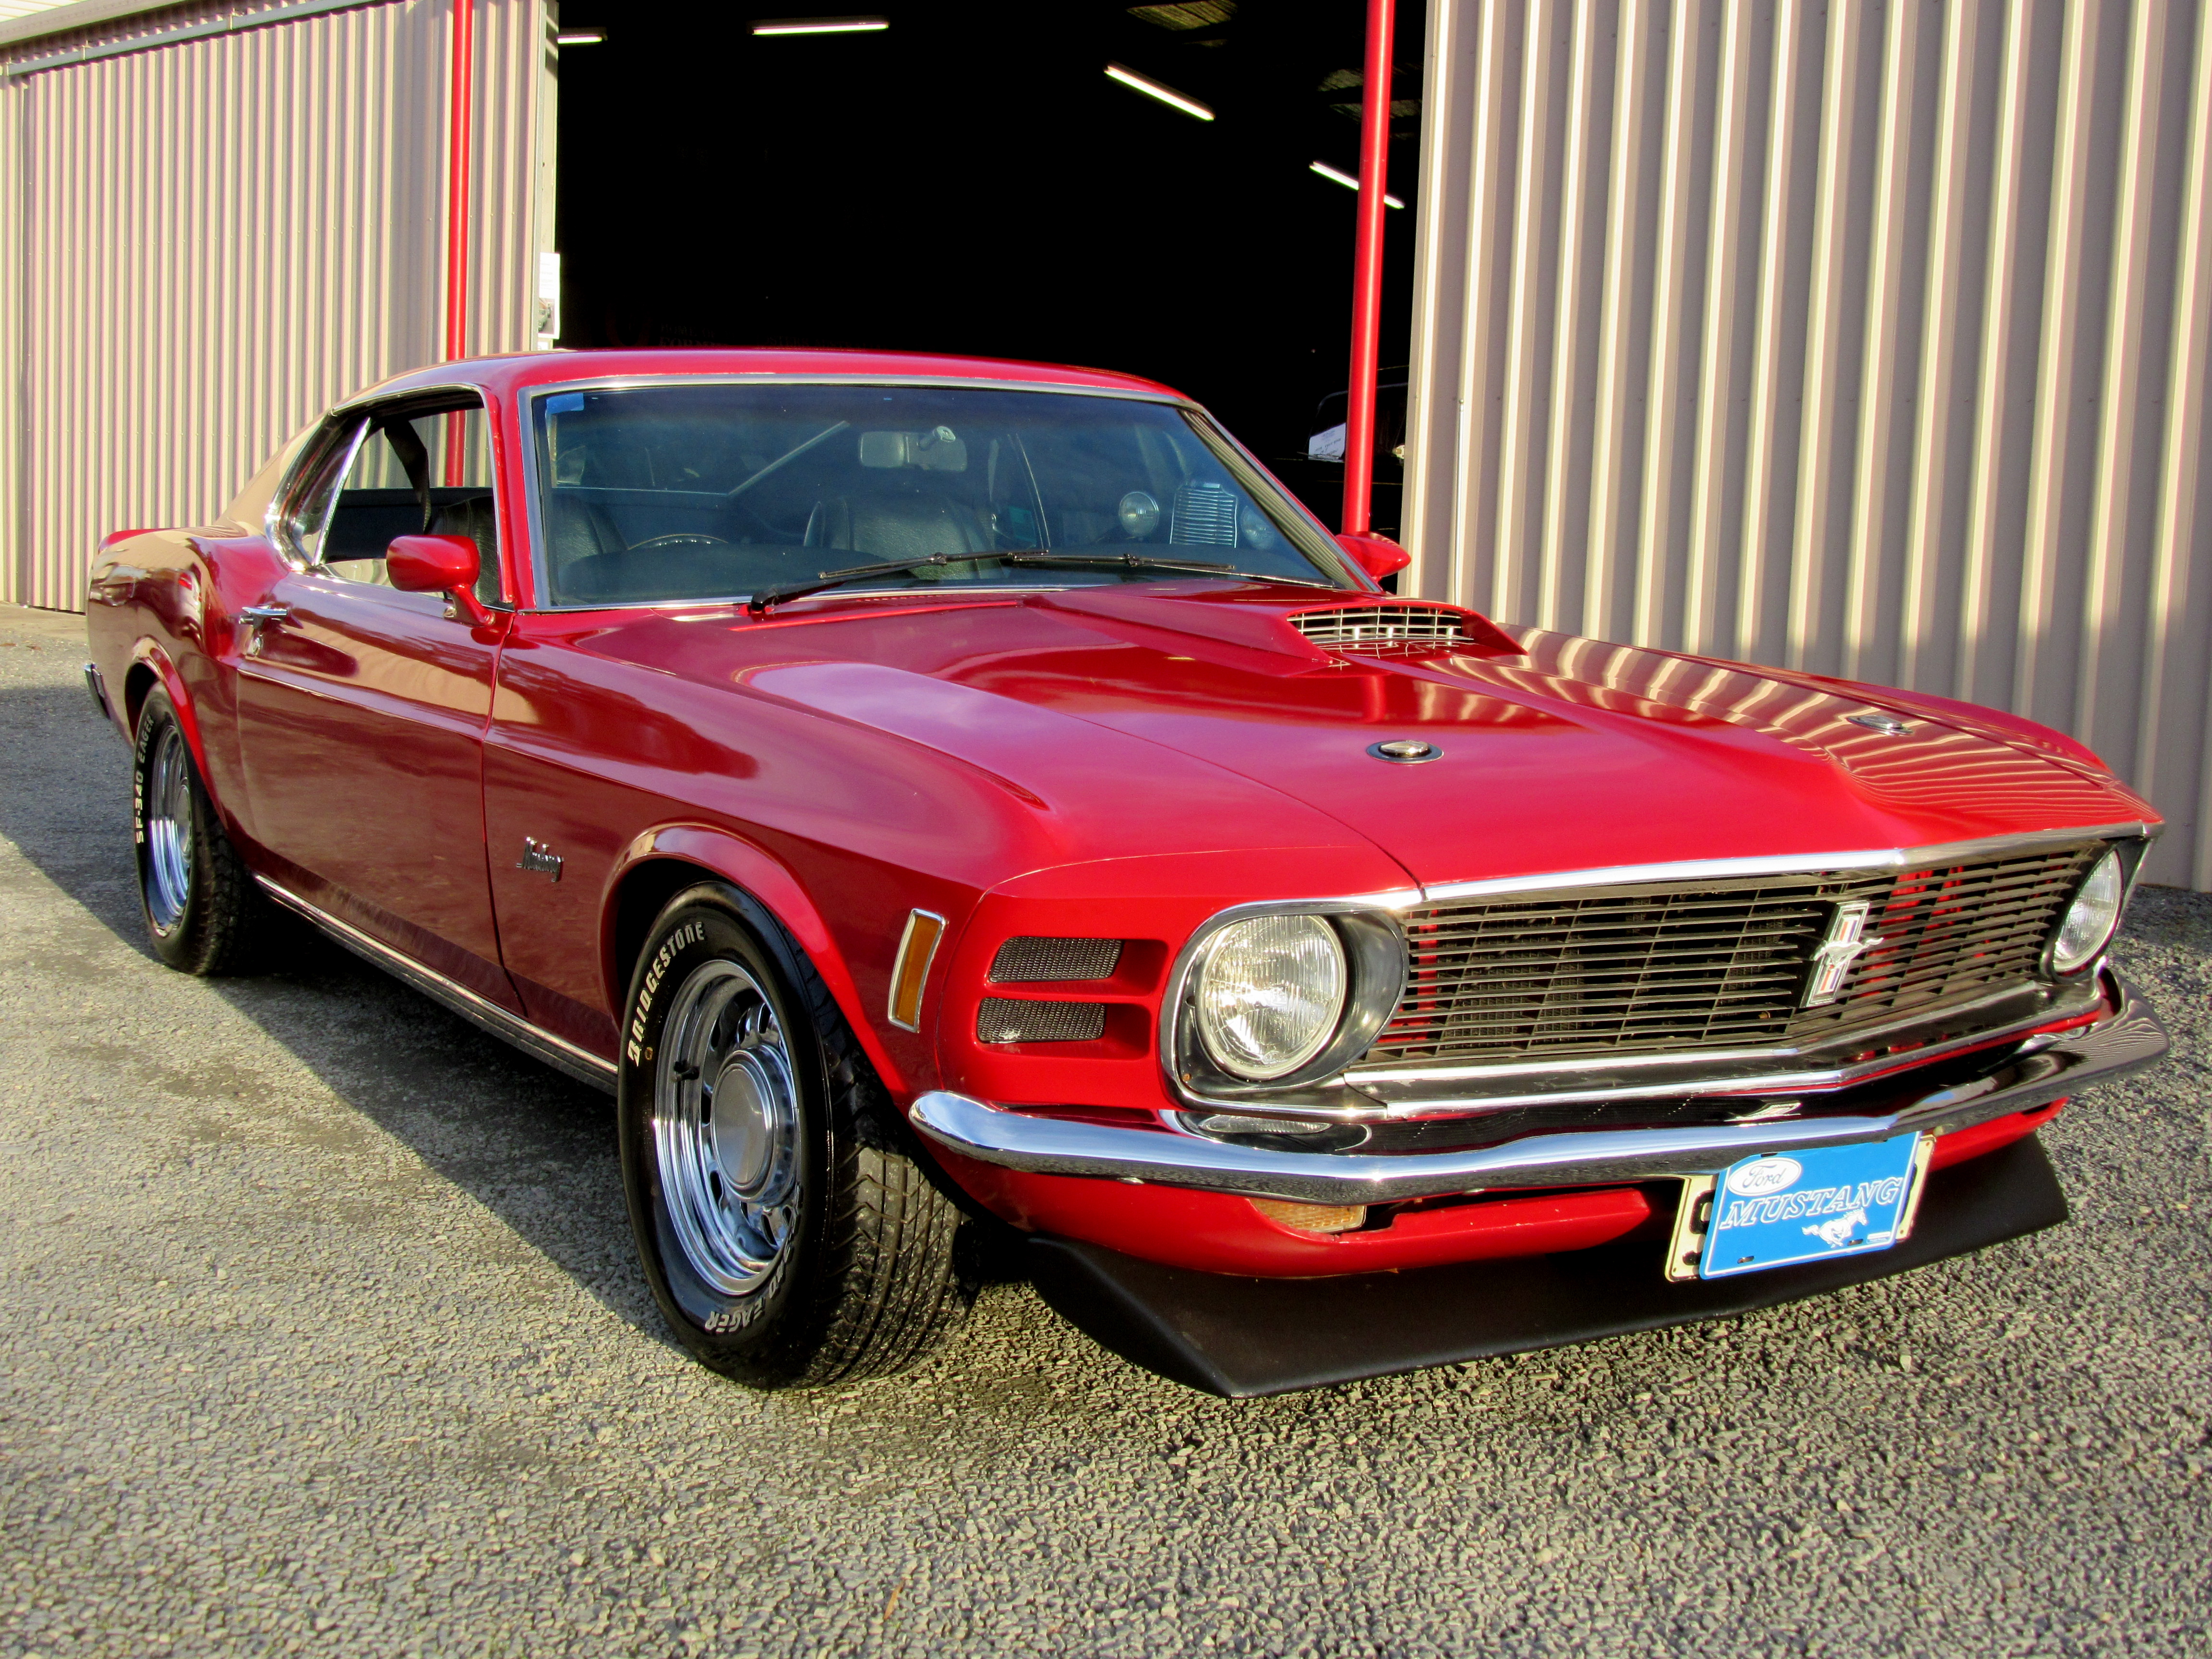 Rebuildable 1970 Mustang Fastback For Sale